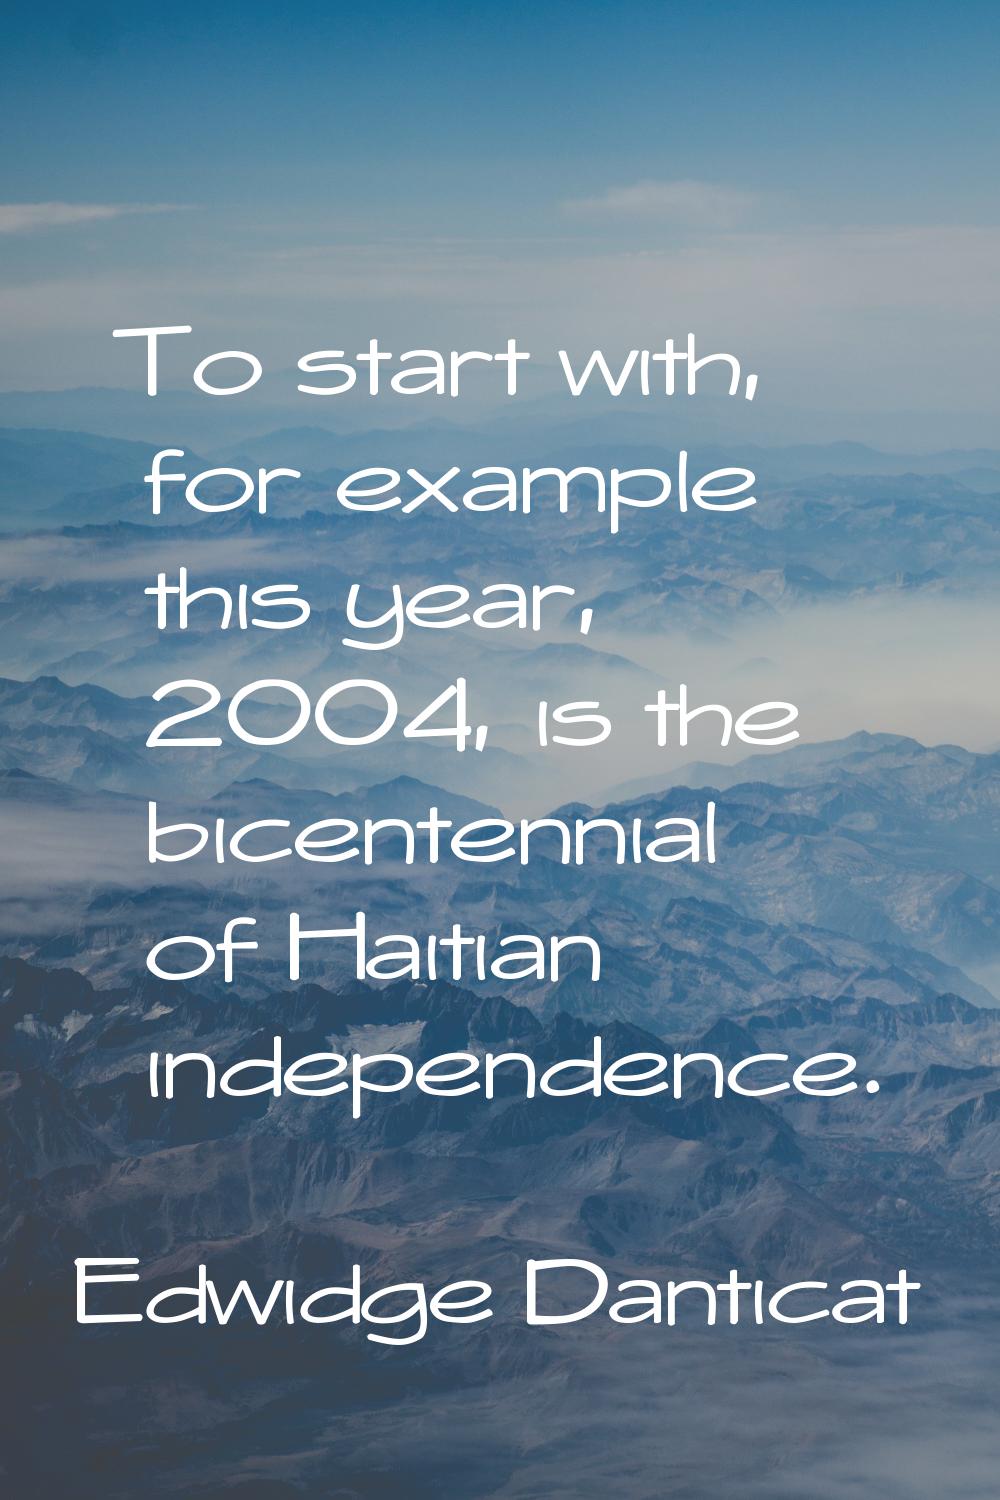 To start with, for example this year, 2004, is the bicentennial of Haitian independence.